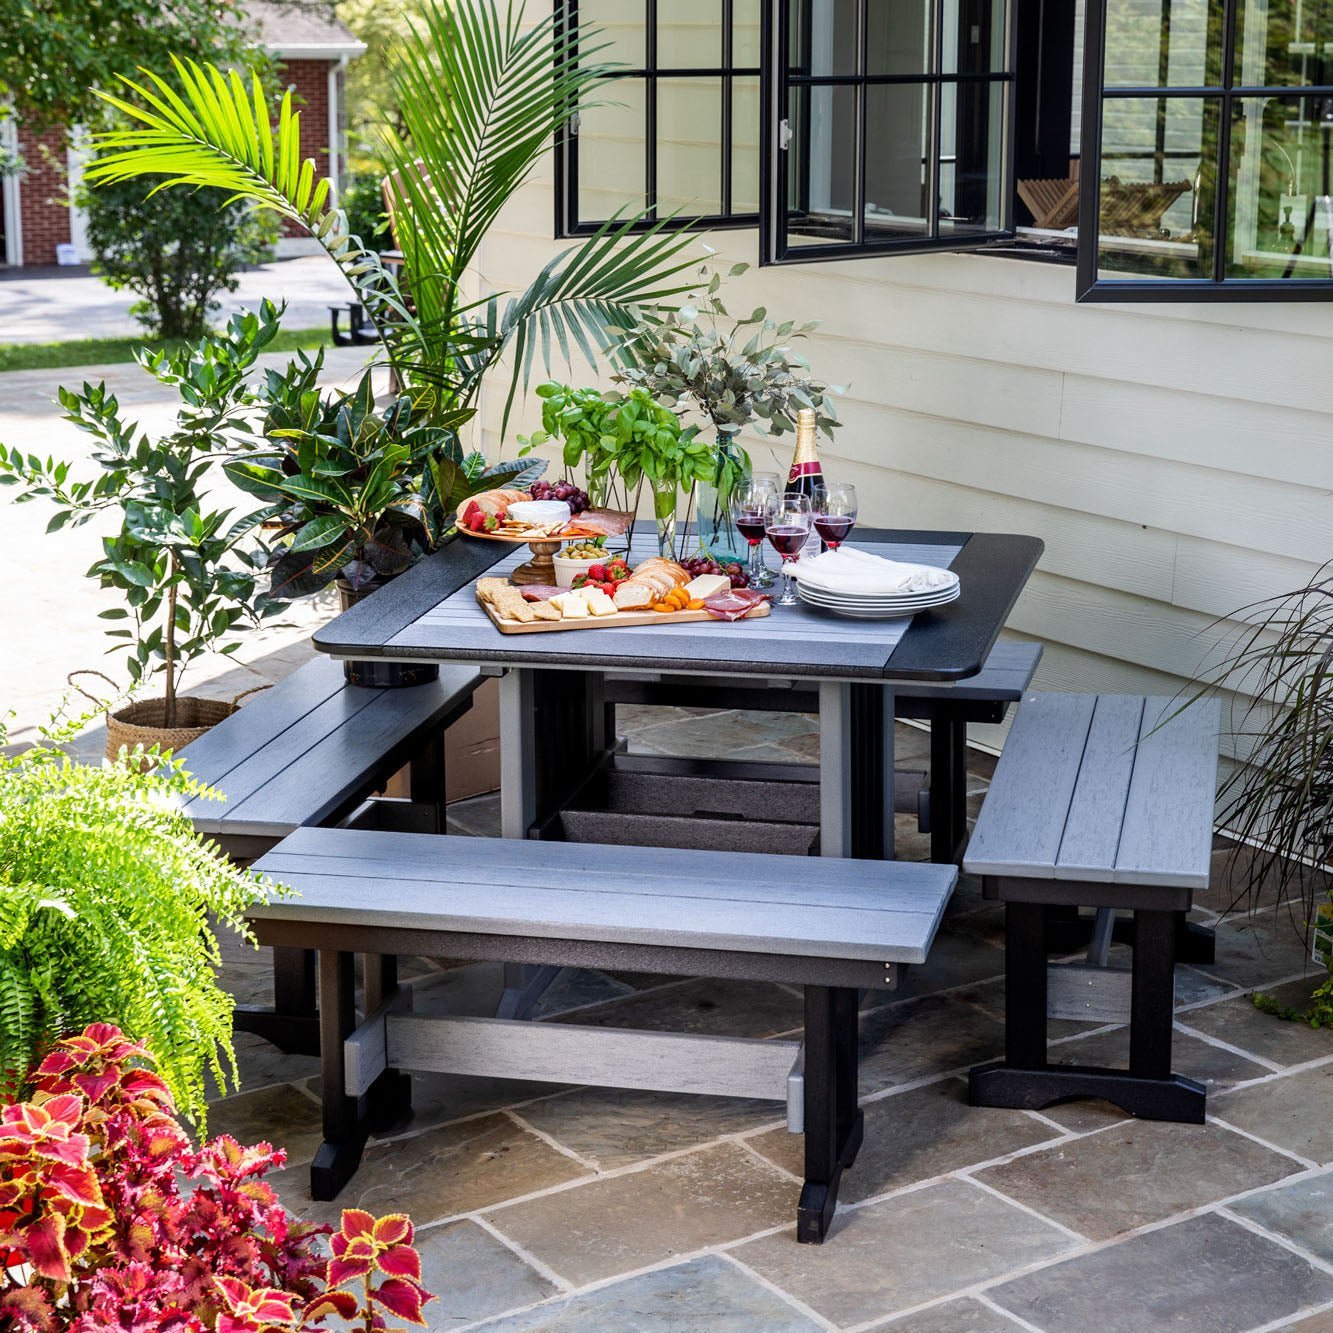 43" Amish Square 5pc English Garden Outdoor Dining Bench Set - Buy as Shown - snyders.furniture